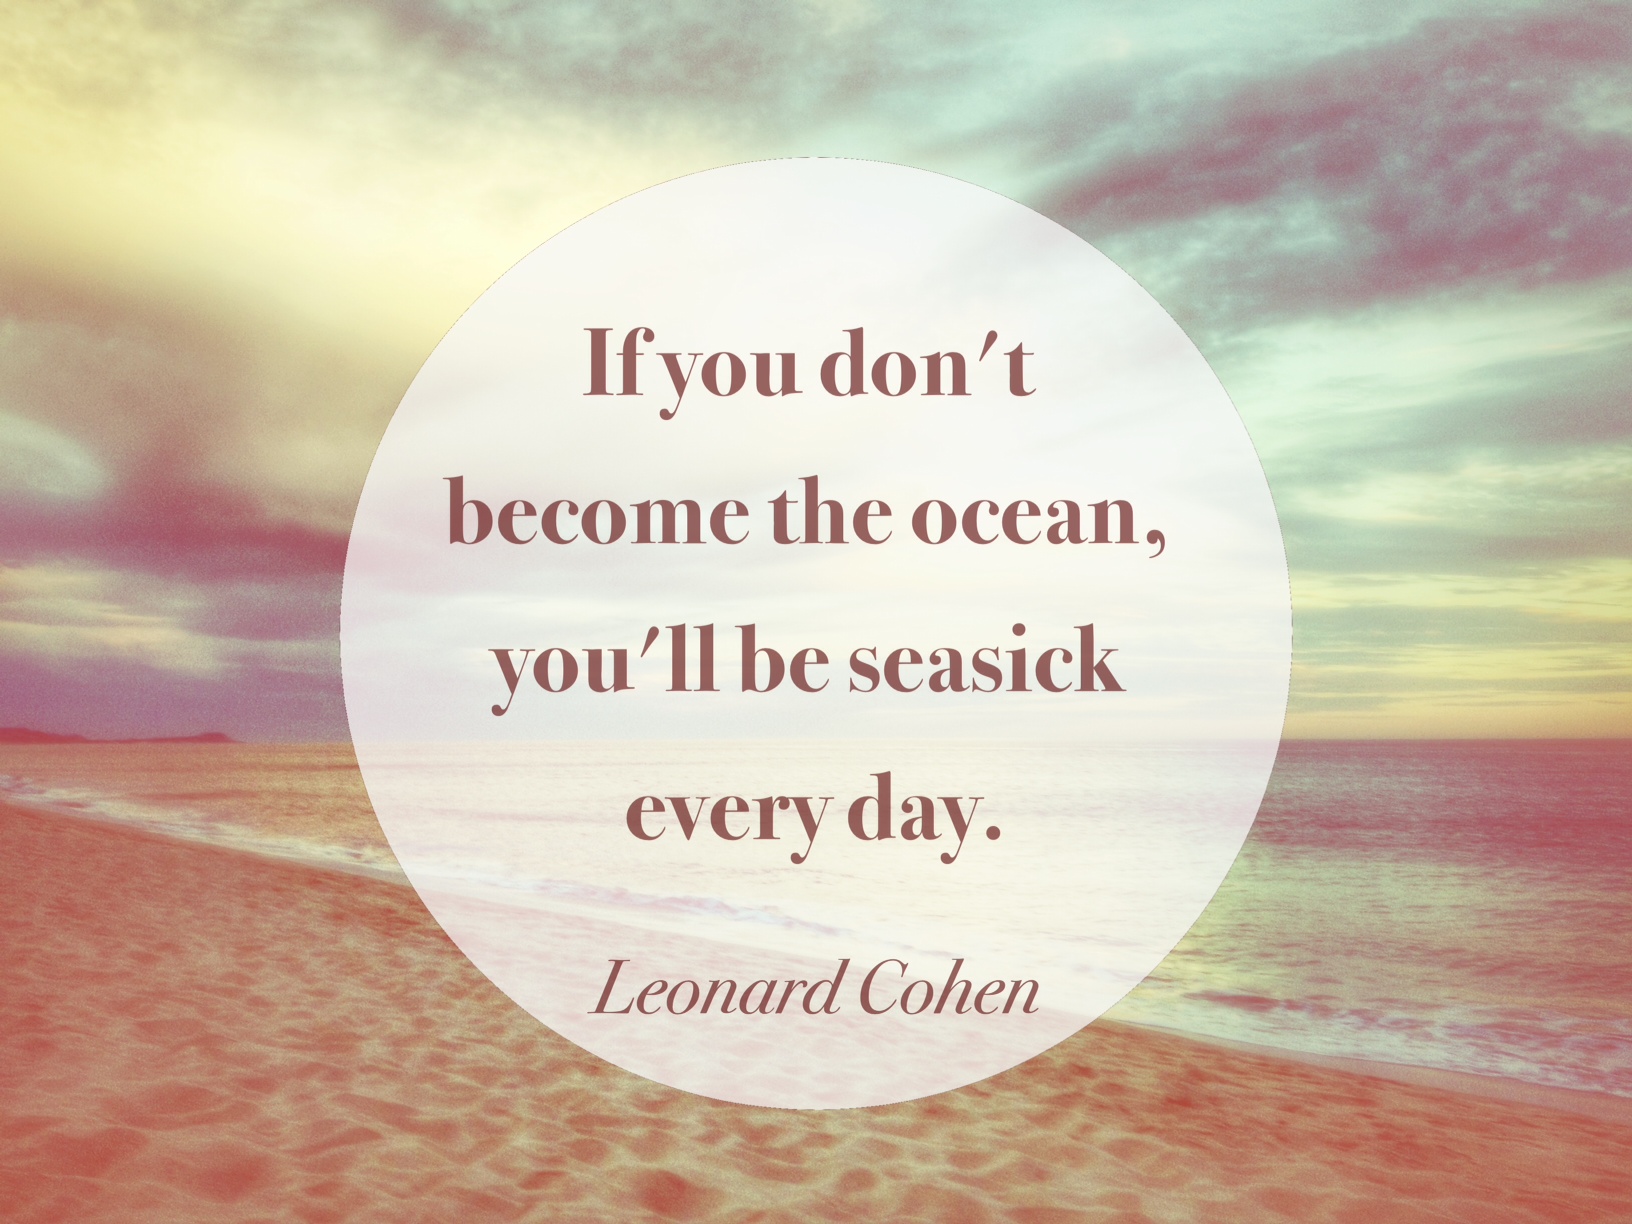 If you don't become the ocean, you'll be seasick everyday. - Leonard Cohen quote